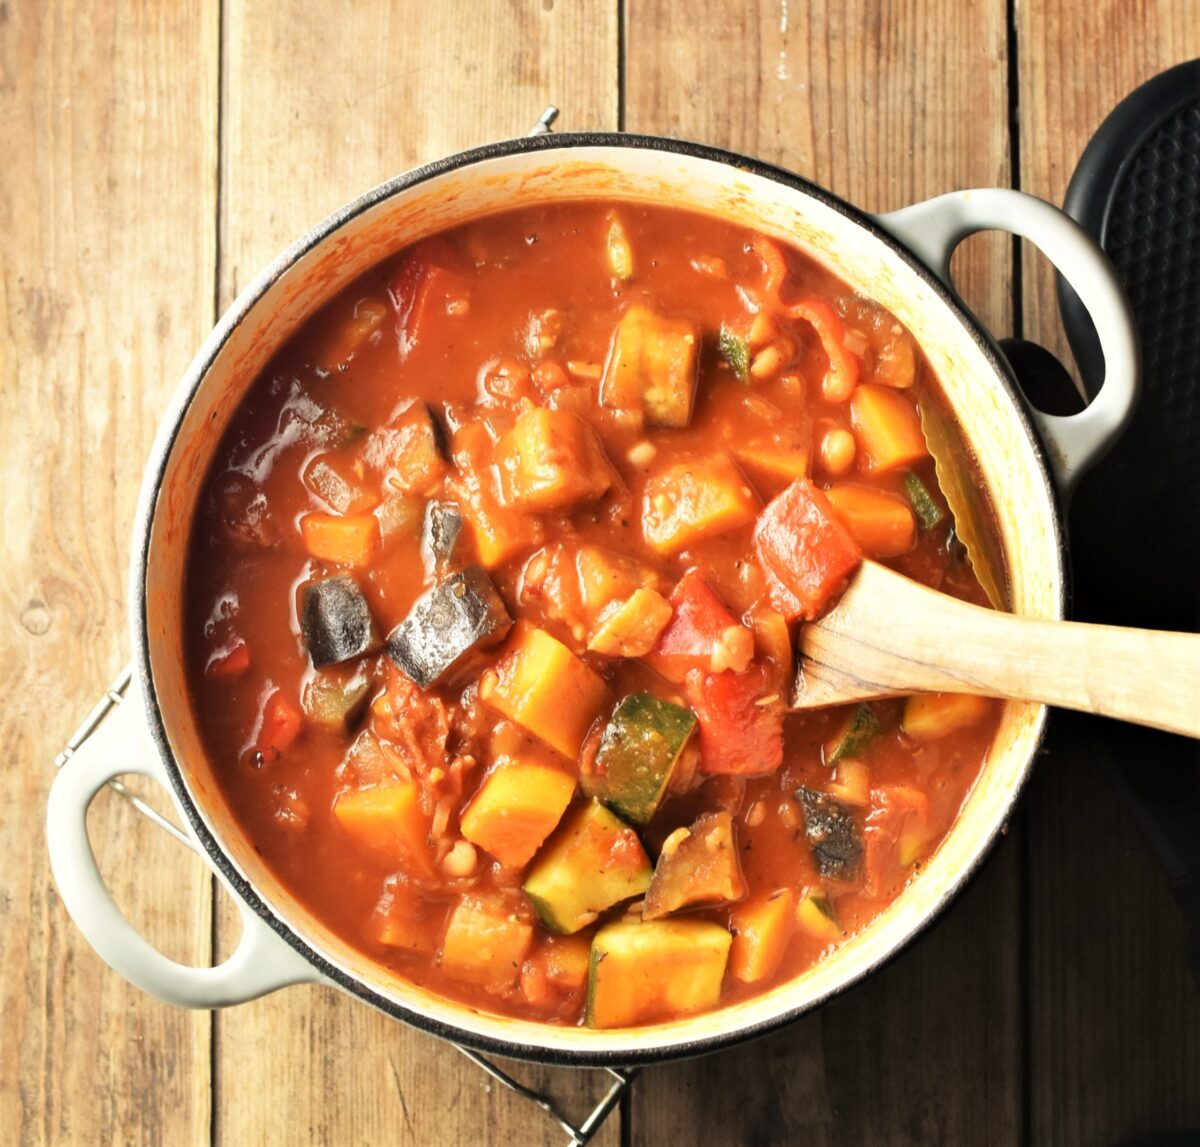 Chunky vegetable stew in tomato sauce in large white post with wooden spoon.